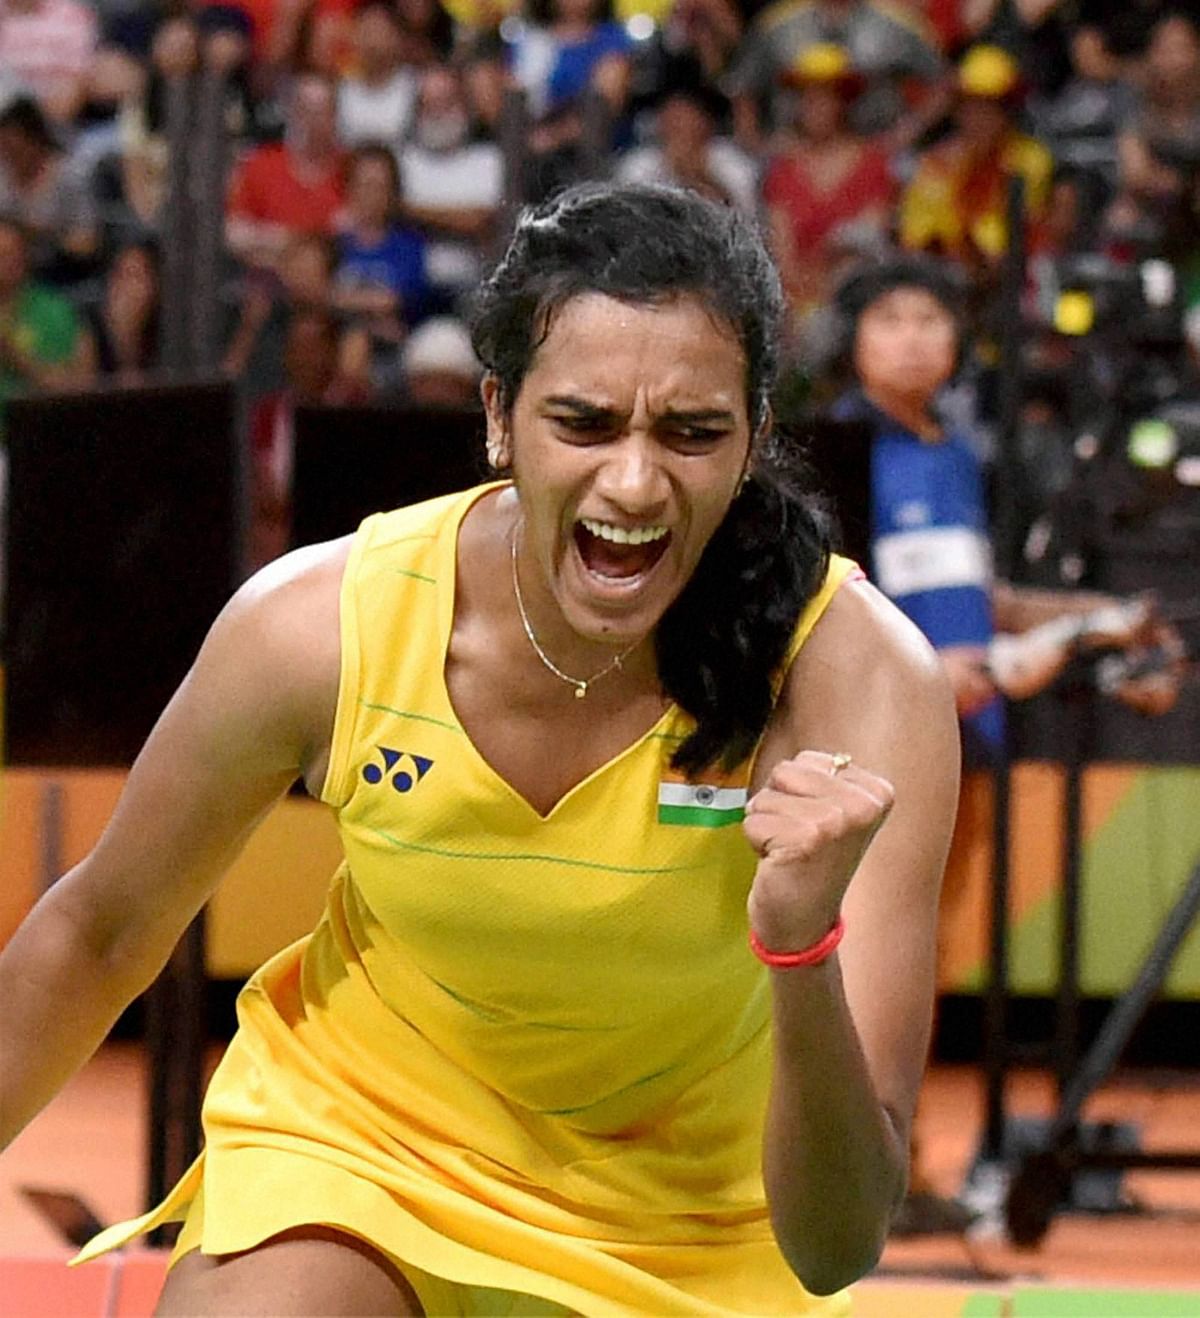 Waiting with bated breath for the gold! Way to go, PV Sindhu!